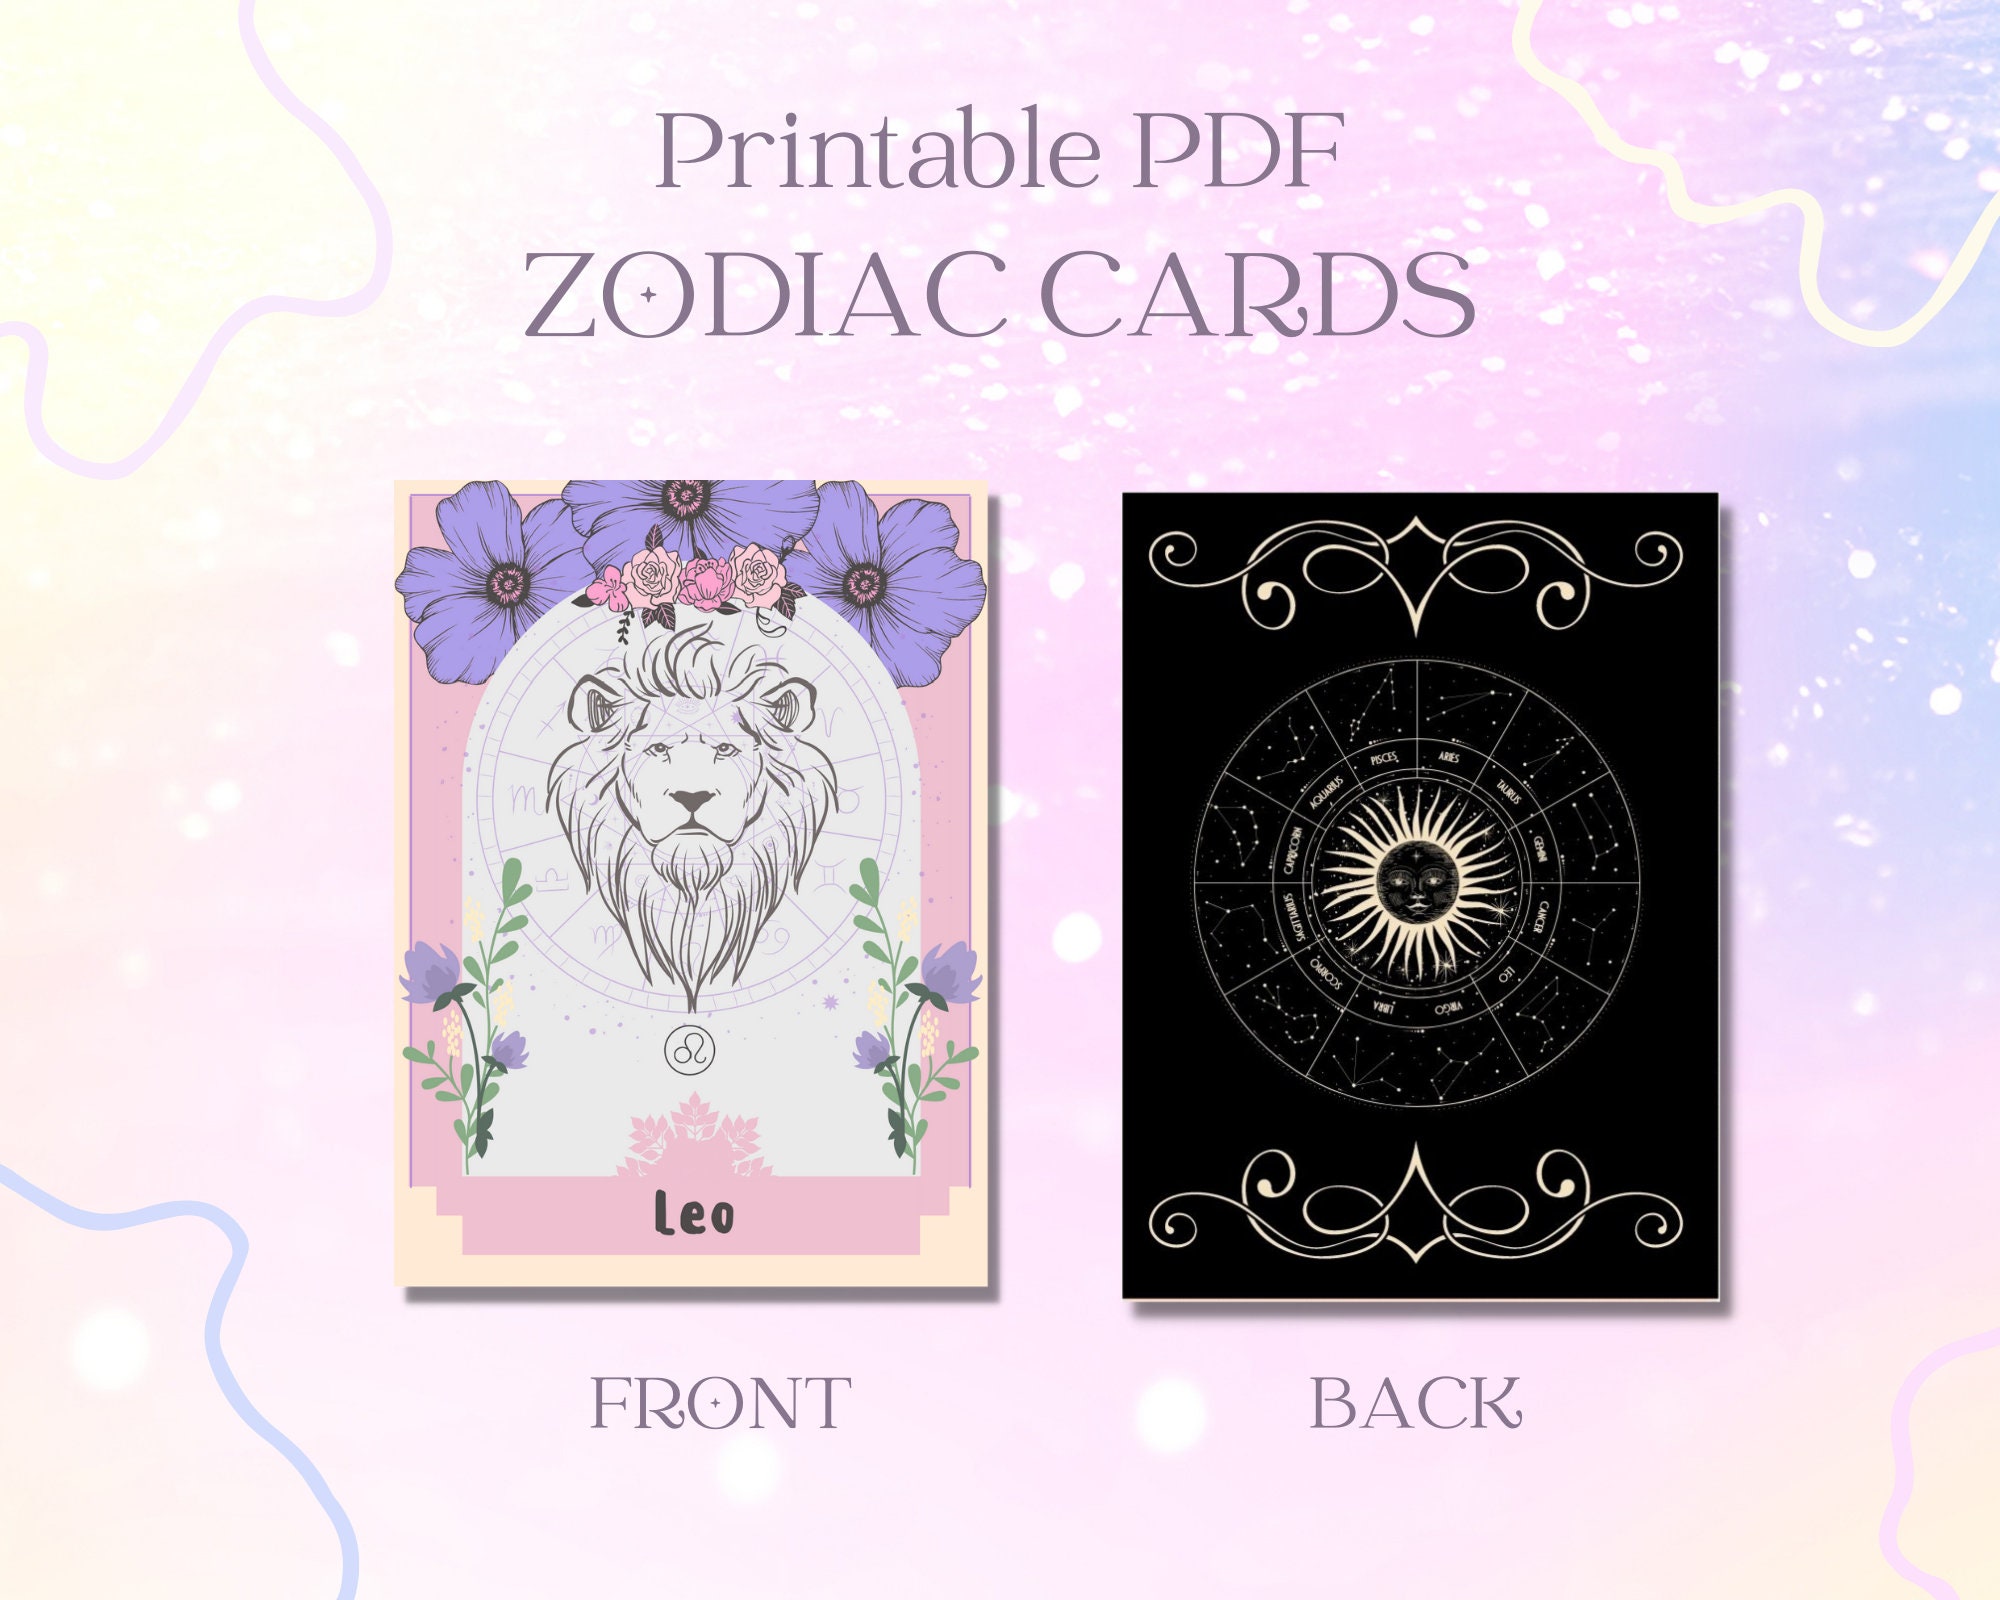 Zodiac Card Deck to Print at Home Complete 12 Zodiac Card - Etsy